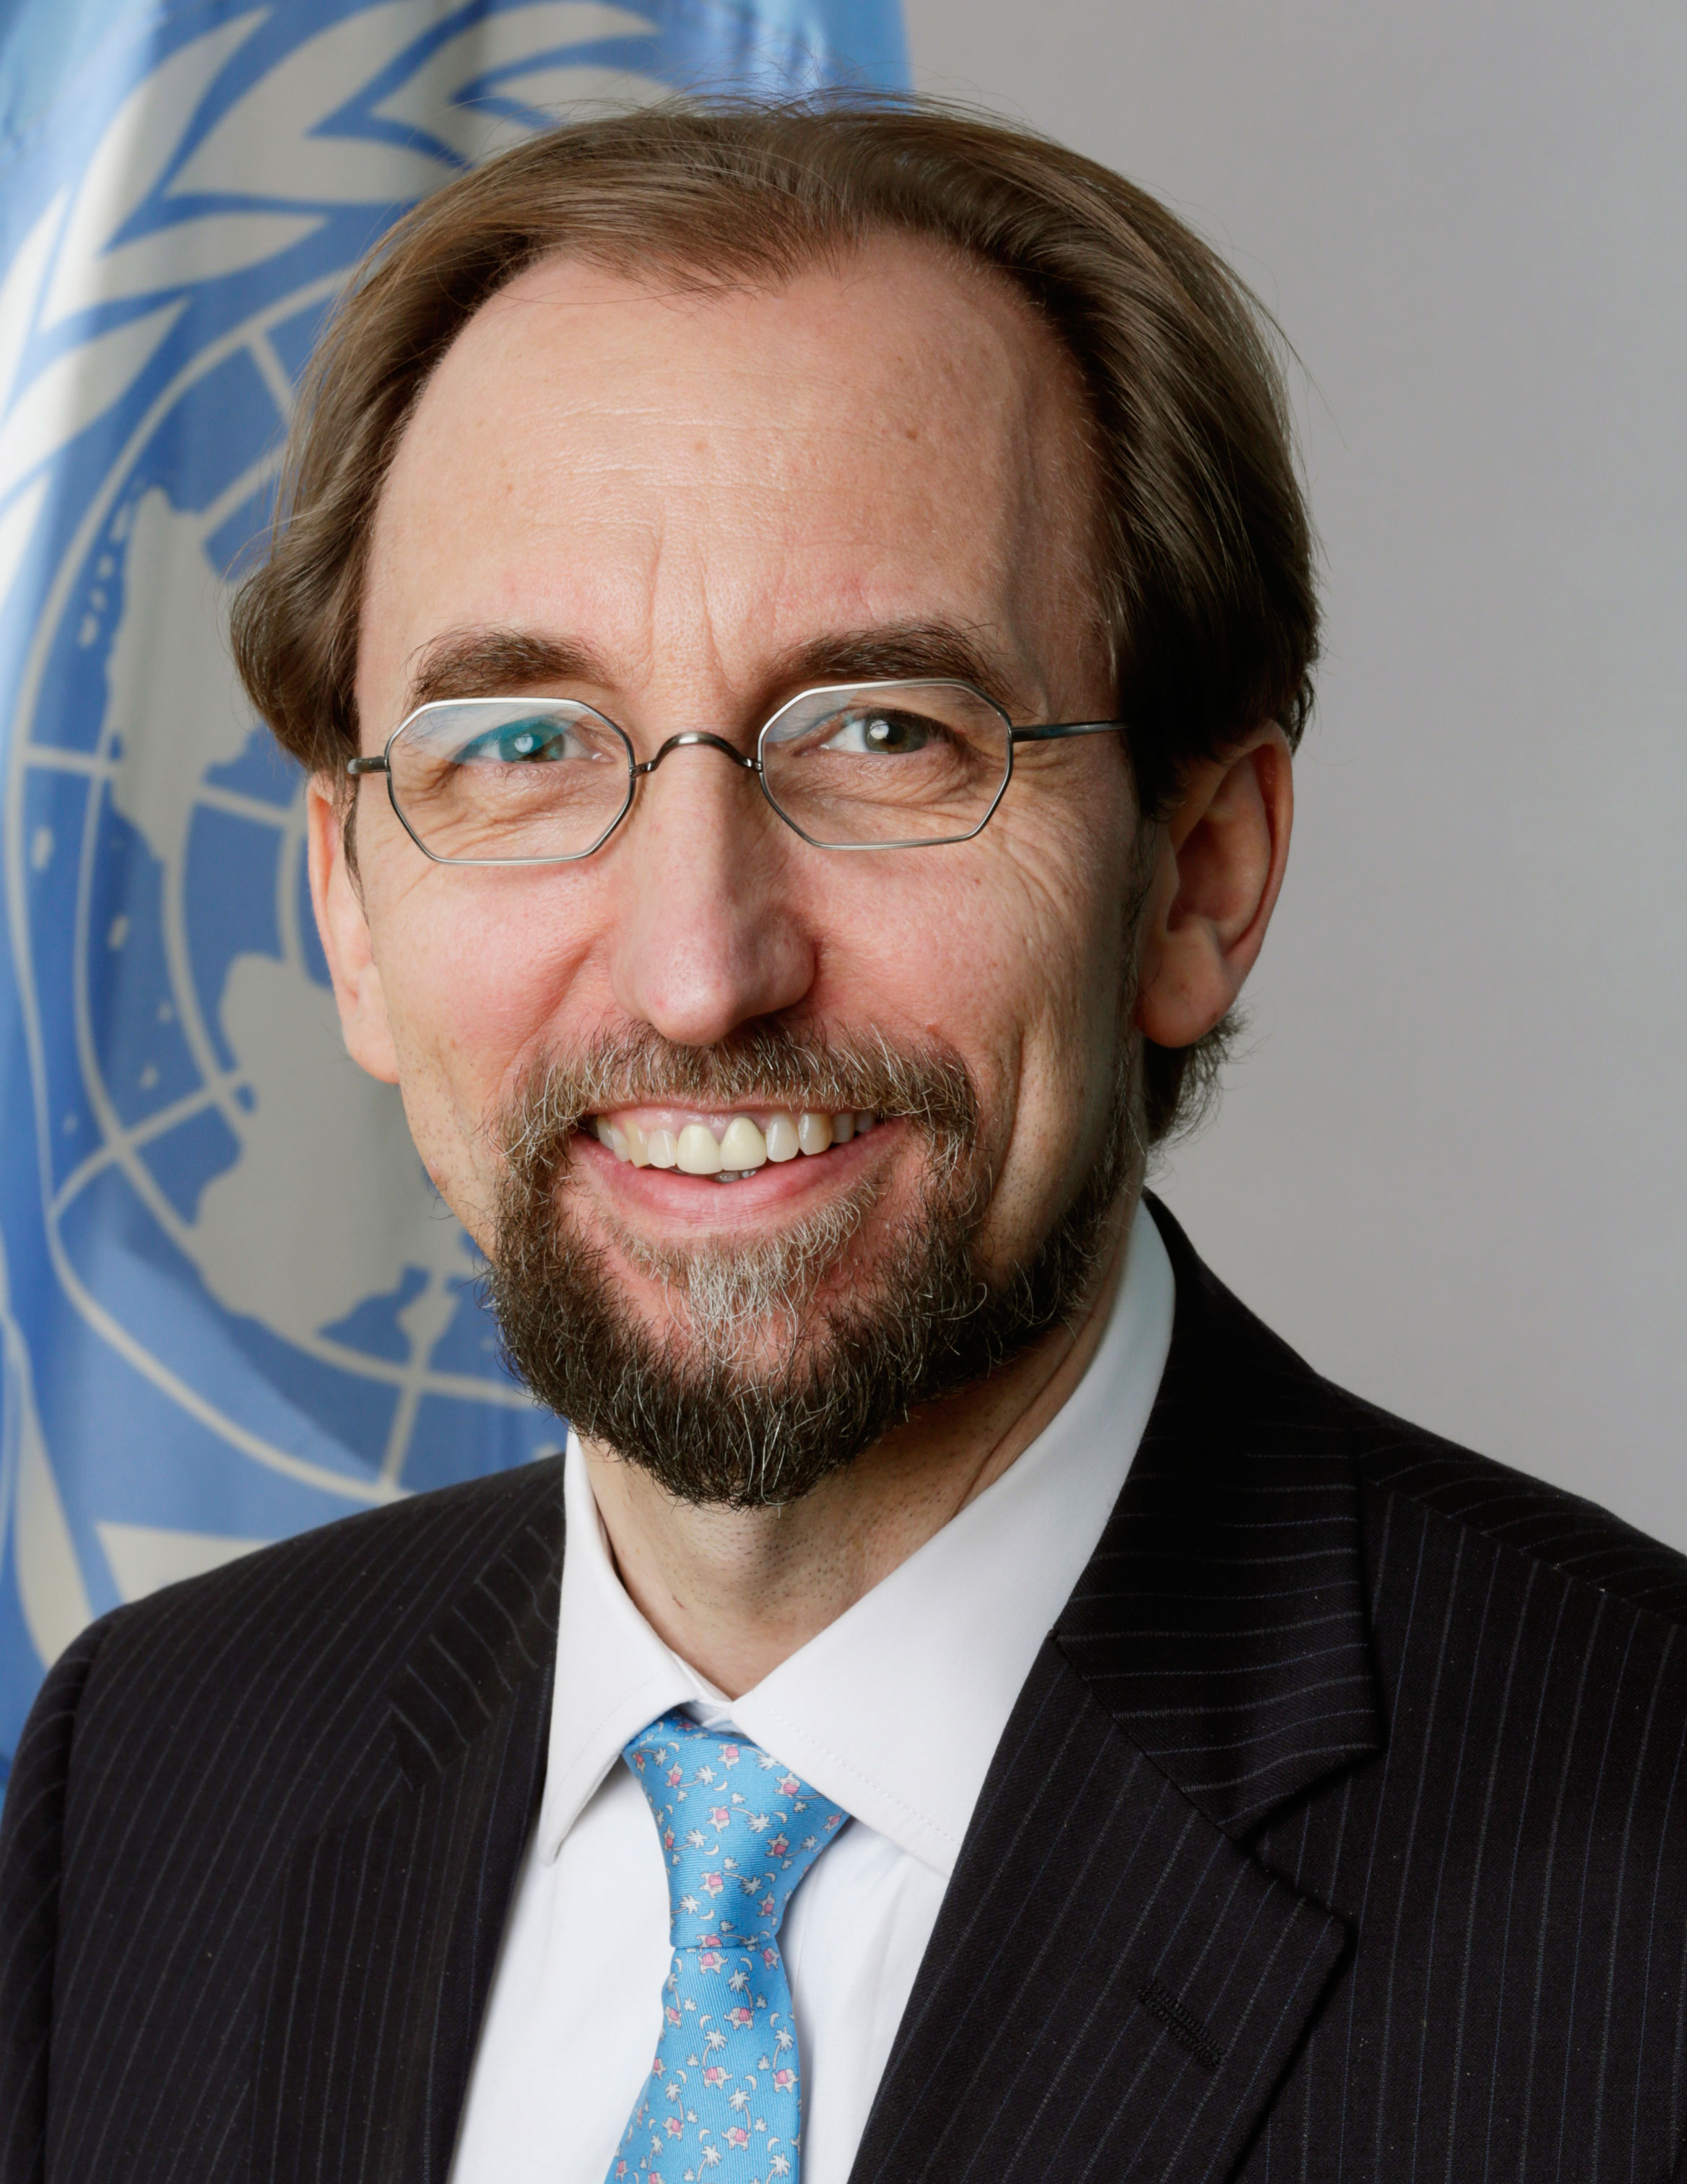 UN High Commissioner for Human Rights (OHCHR) Zeid Ra'ad Ibn Al-Hussein